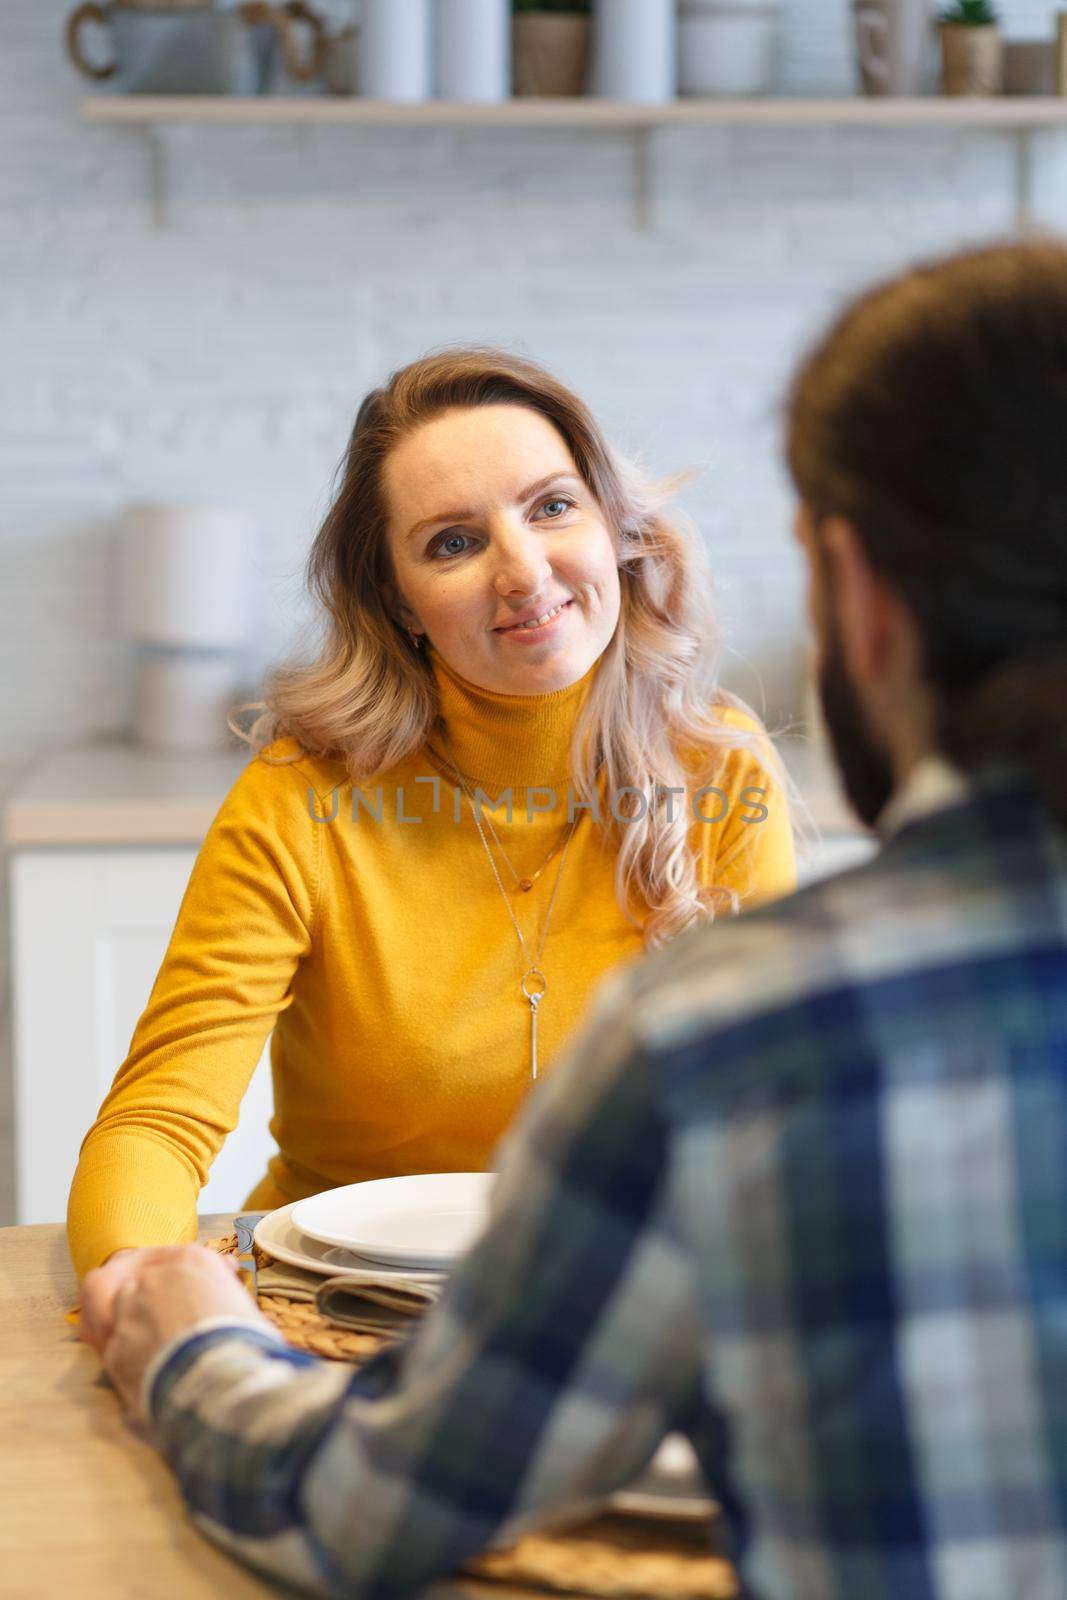 Beautiful couple having a conversation while looking at each other sitting at the table in a kitchen